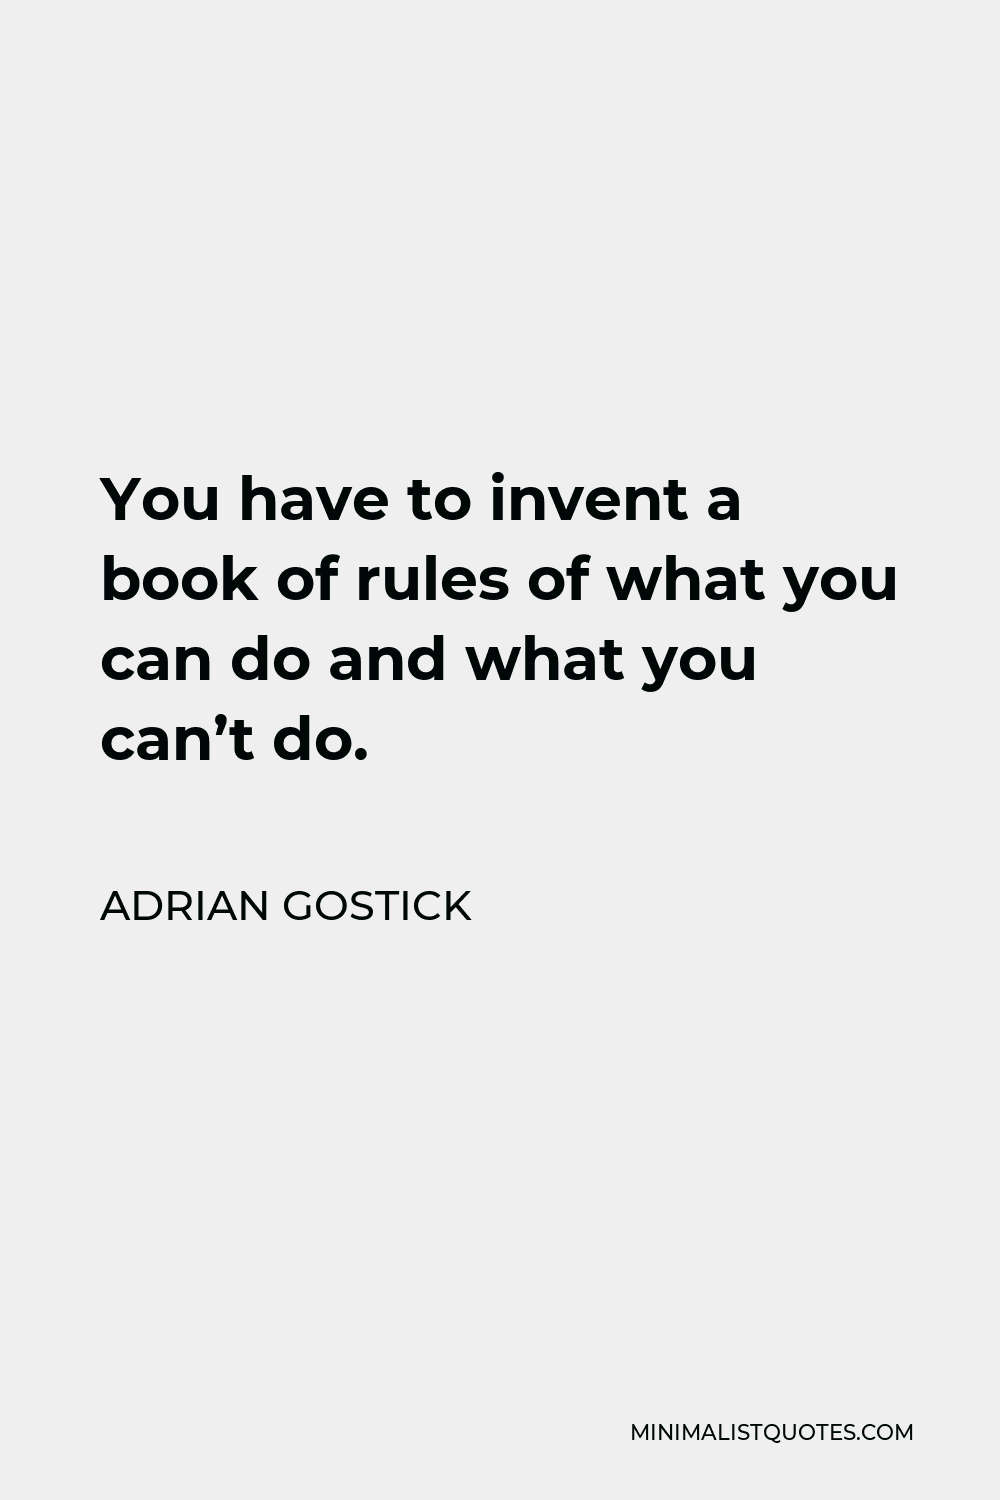 Adrian Gostick Quote - You have to invent a book of rules of what you can do and what you can’t do.